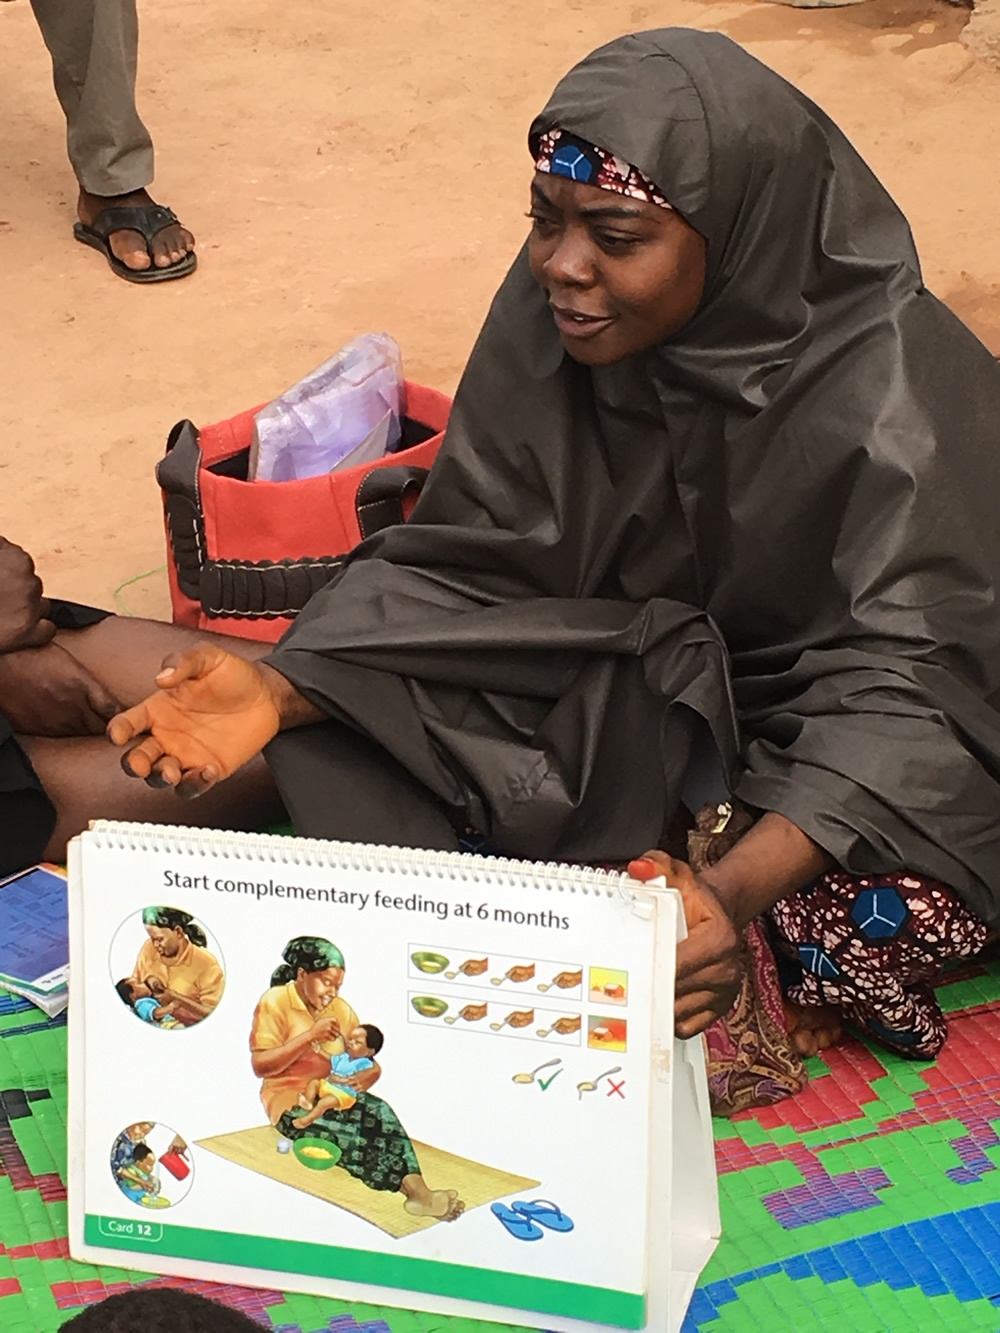 Mrs. Maryam Adams, a C-IYCF Community Volunteer in Kasuwan Magani ward in Kajuru LGA, discusses the introduction of complementary foods to children at 6 months of age.